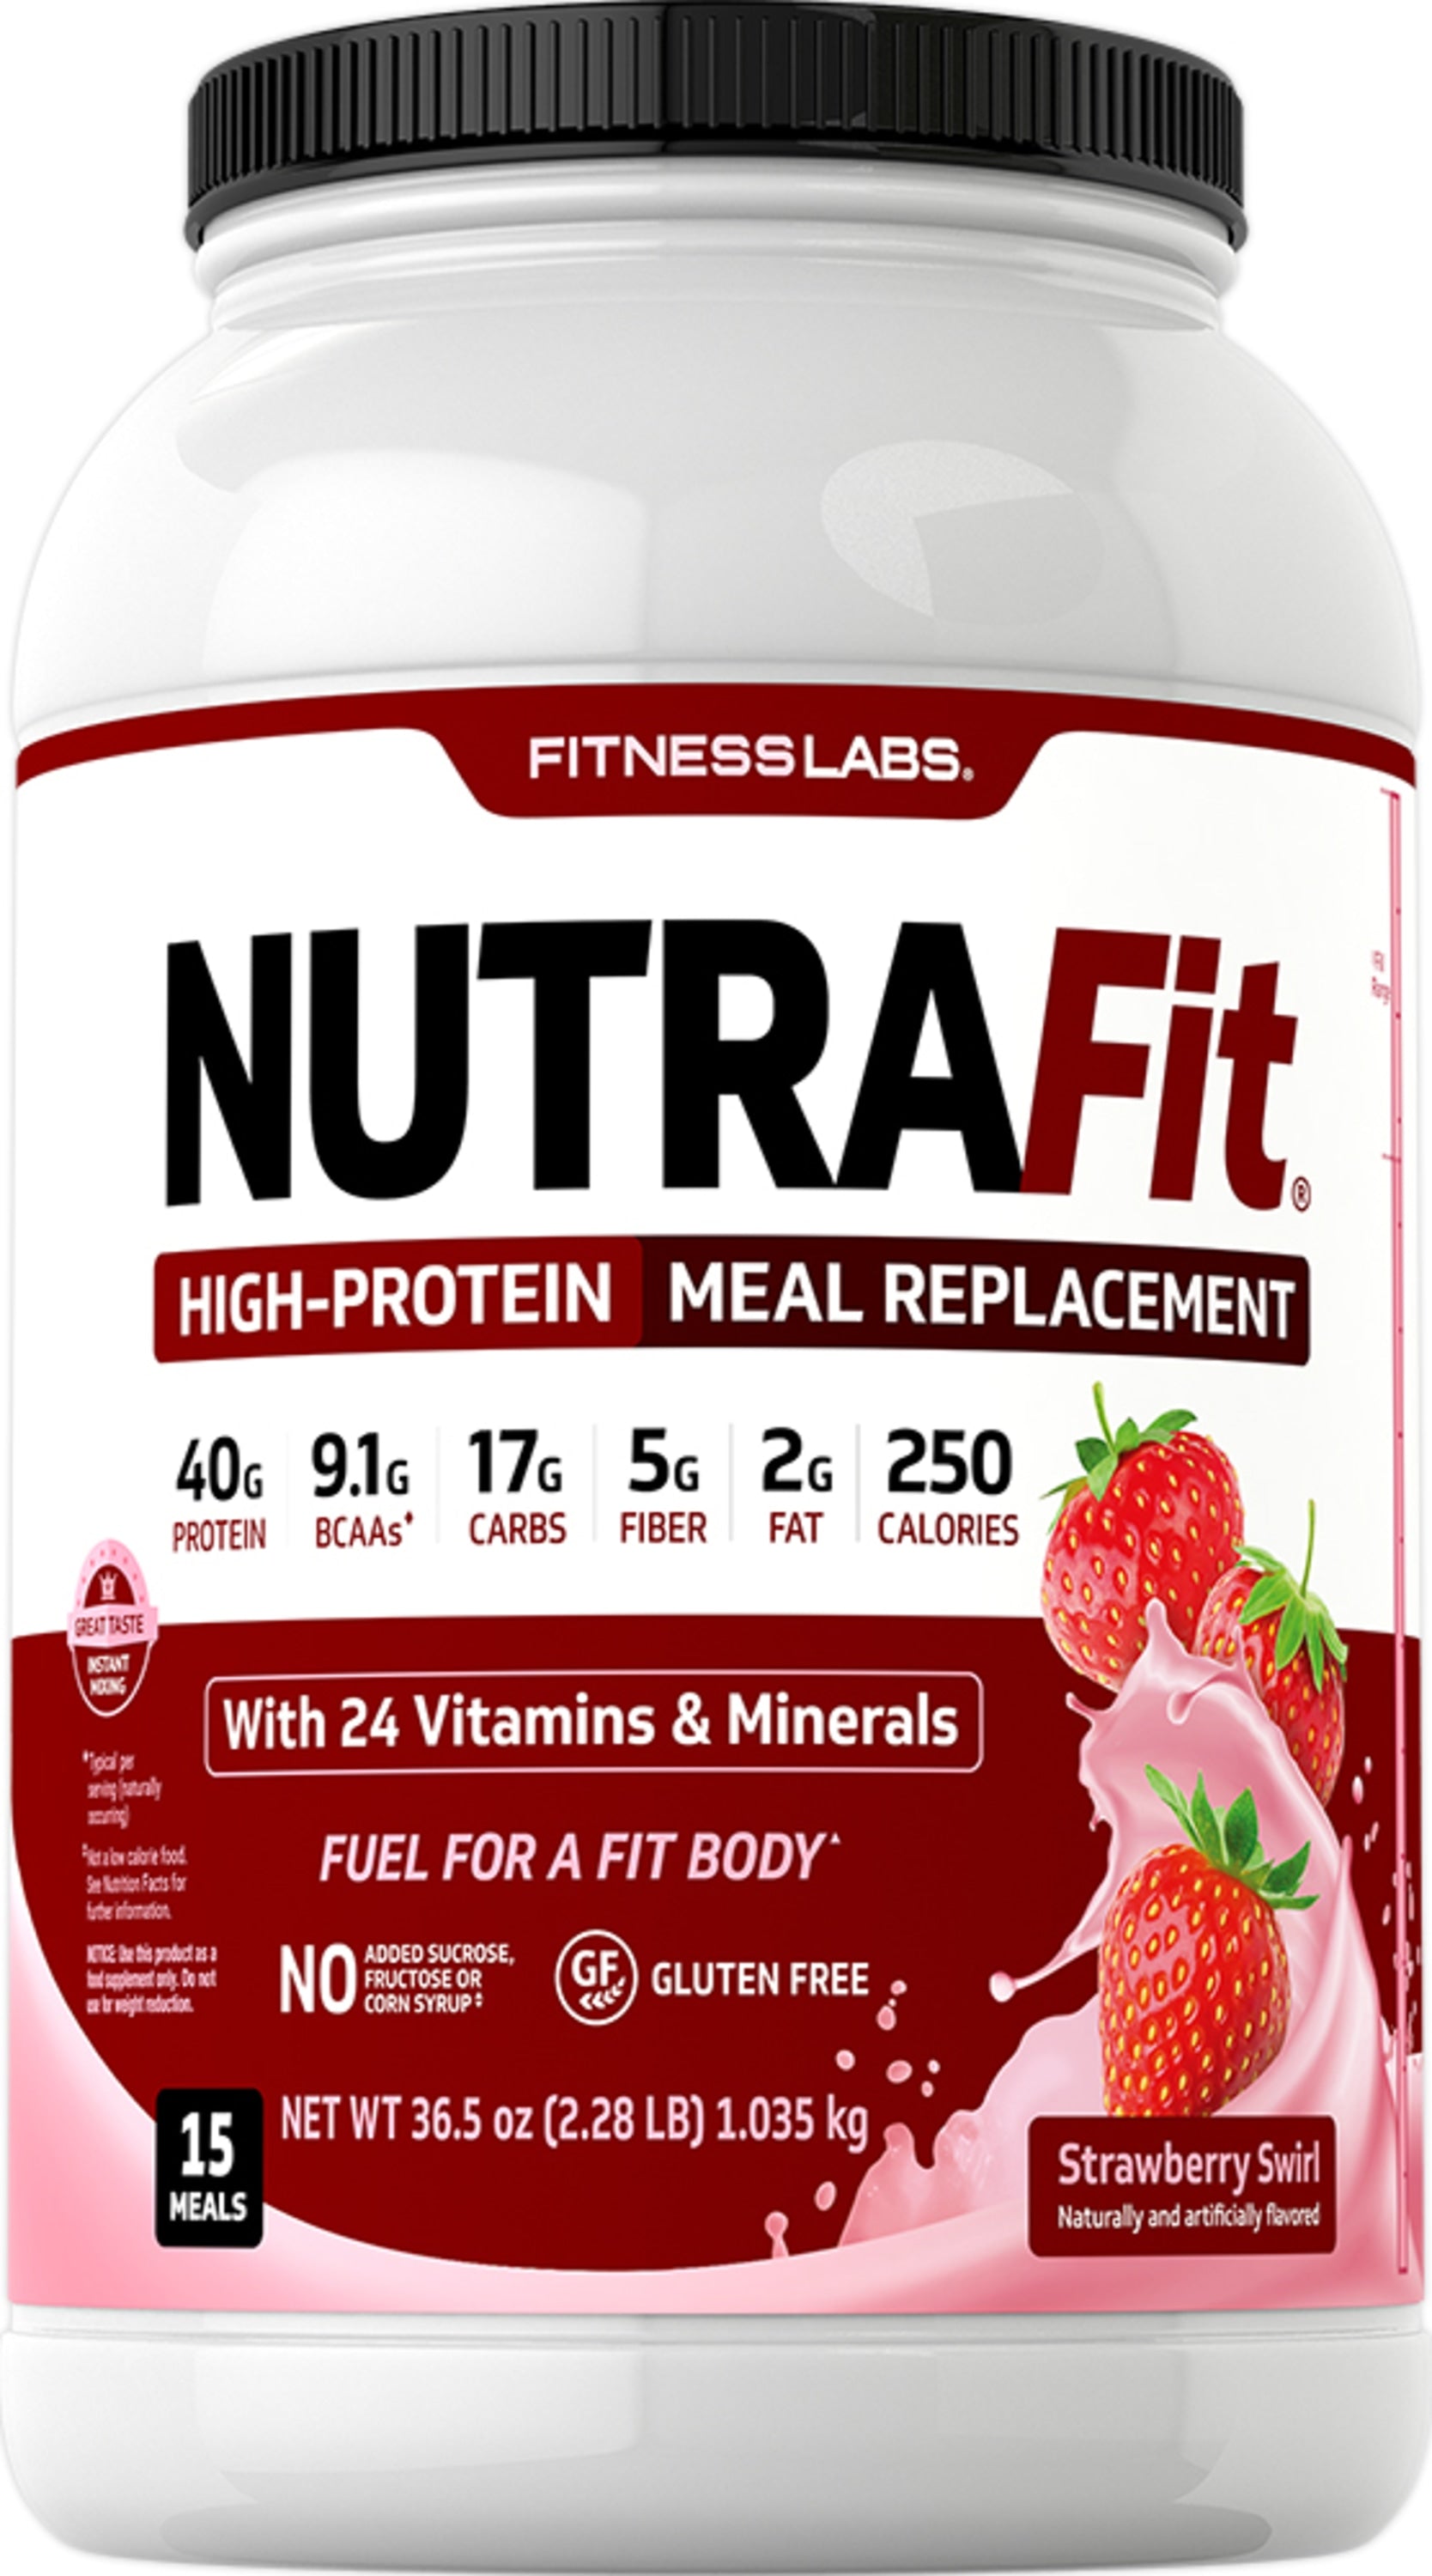 Meal Replacement Shake NutraFit (Strawberry Swirl), 2.28 Lbs (1.035 kg) Bottle